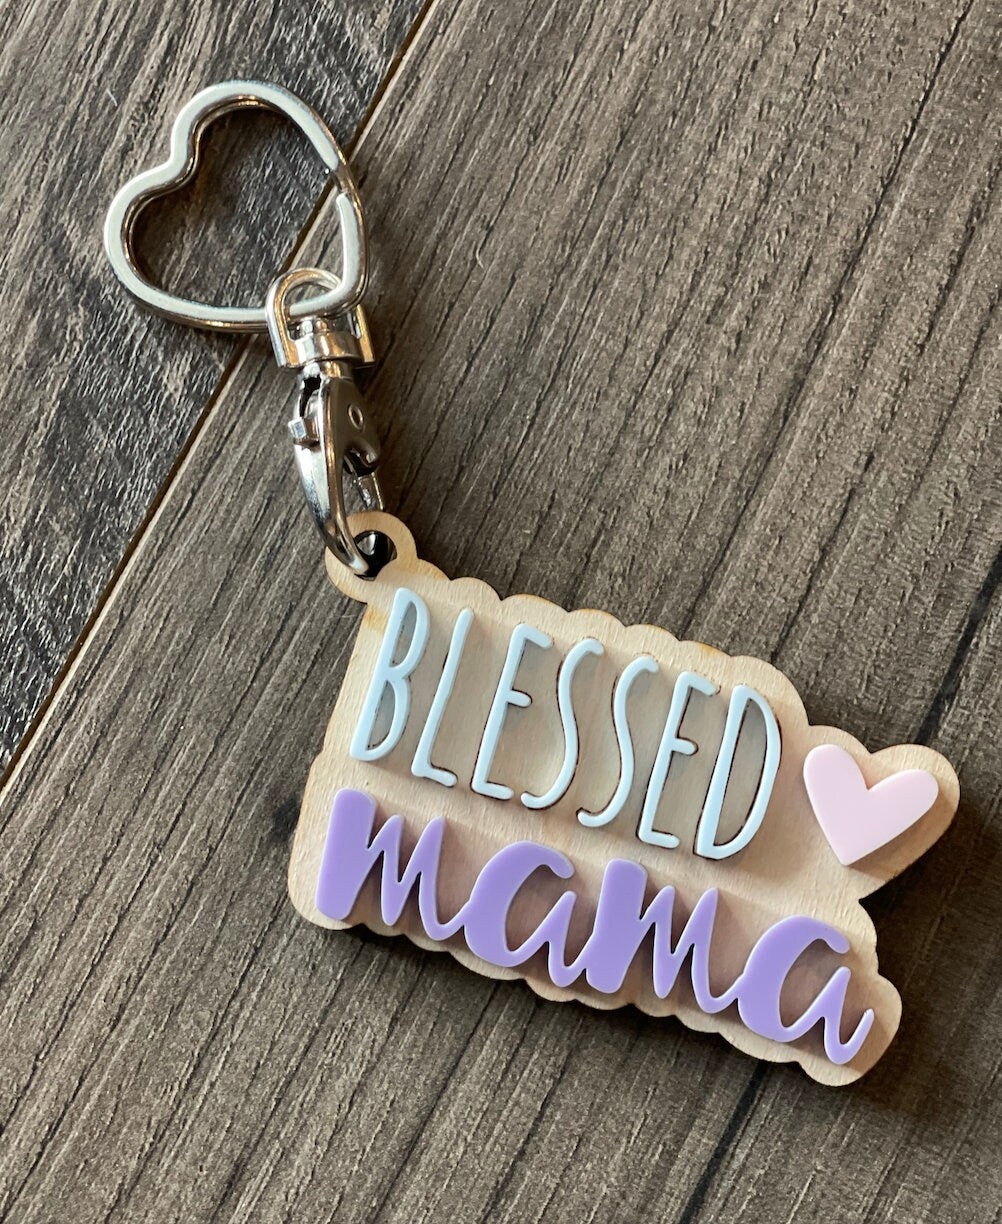 Wood and Acrylic Personalized Keychain, Blessed Mama Keychain, Acrylic Keychain, Mother's Day Gift, Mom Christmas Gift, Cute Keychain